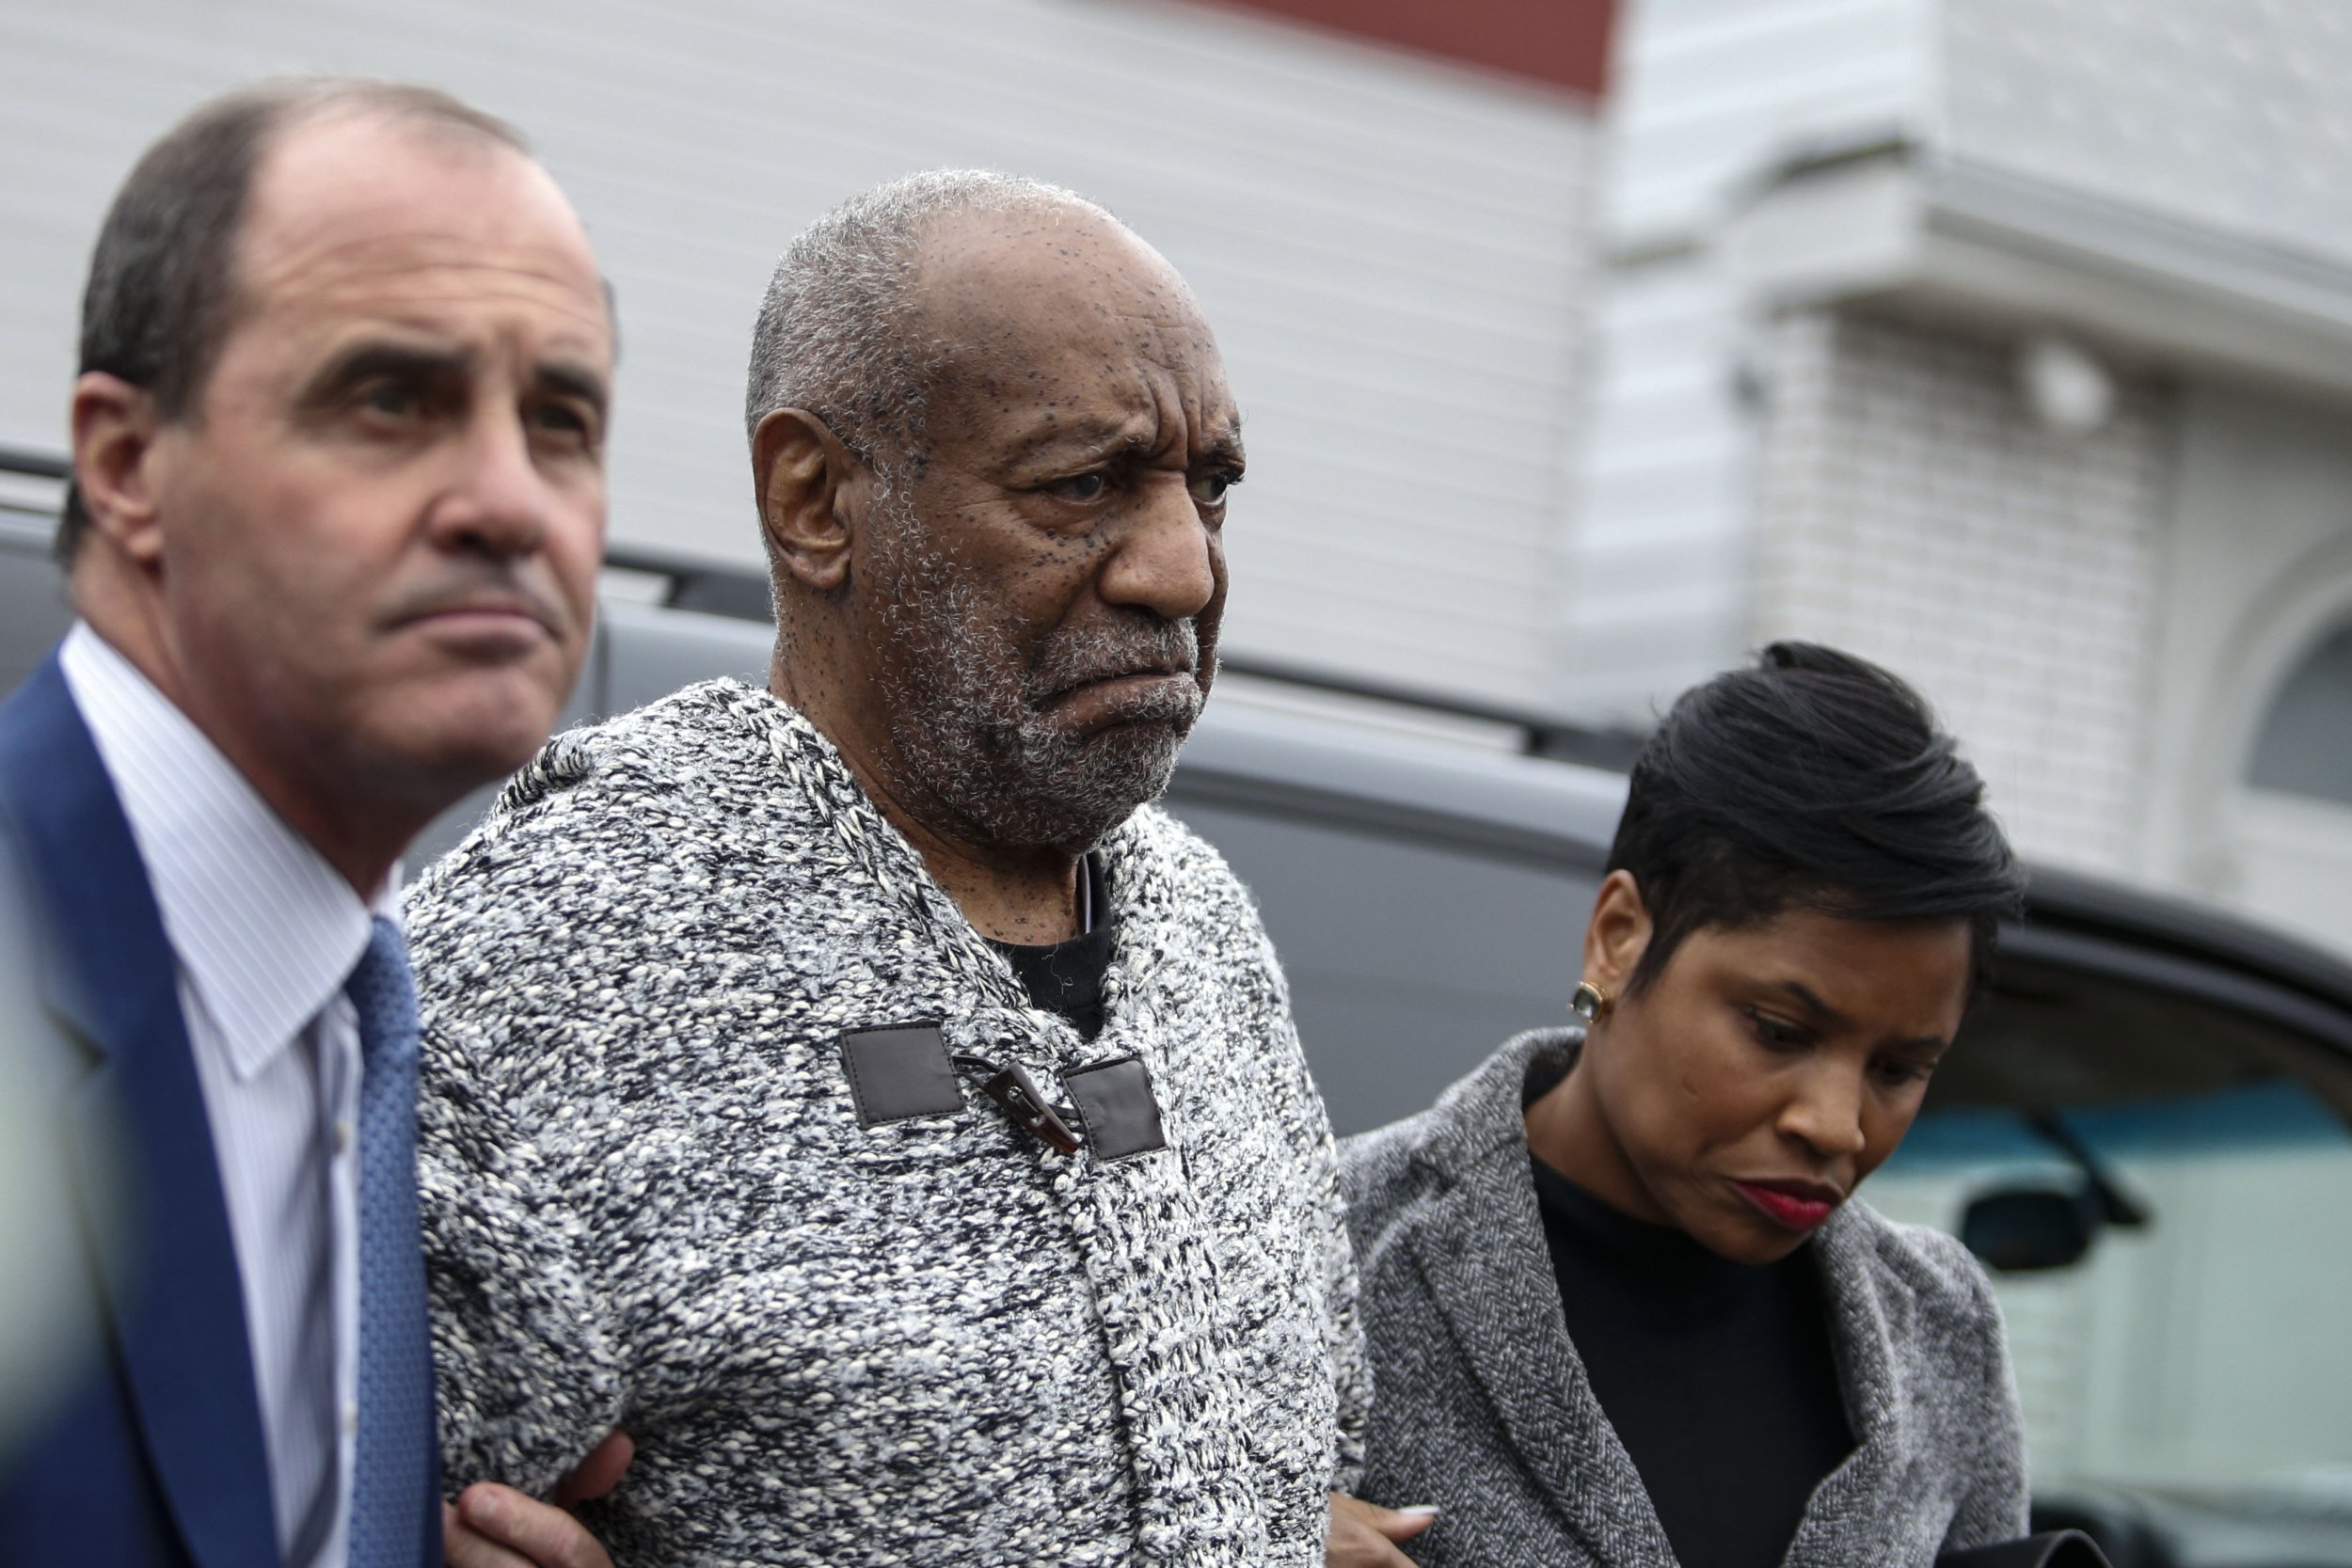 Bill Cosby Sexual Assault Update Arrest Warrant Issued For Comedian In 2004 Sexual Assault Case